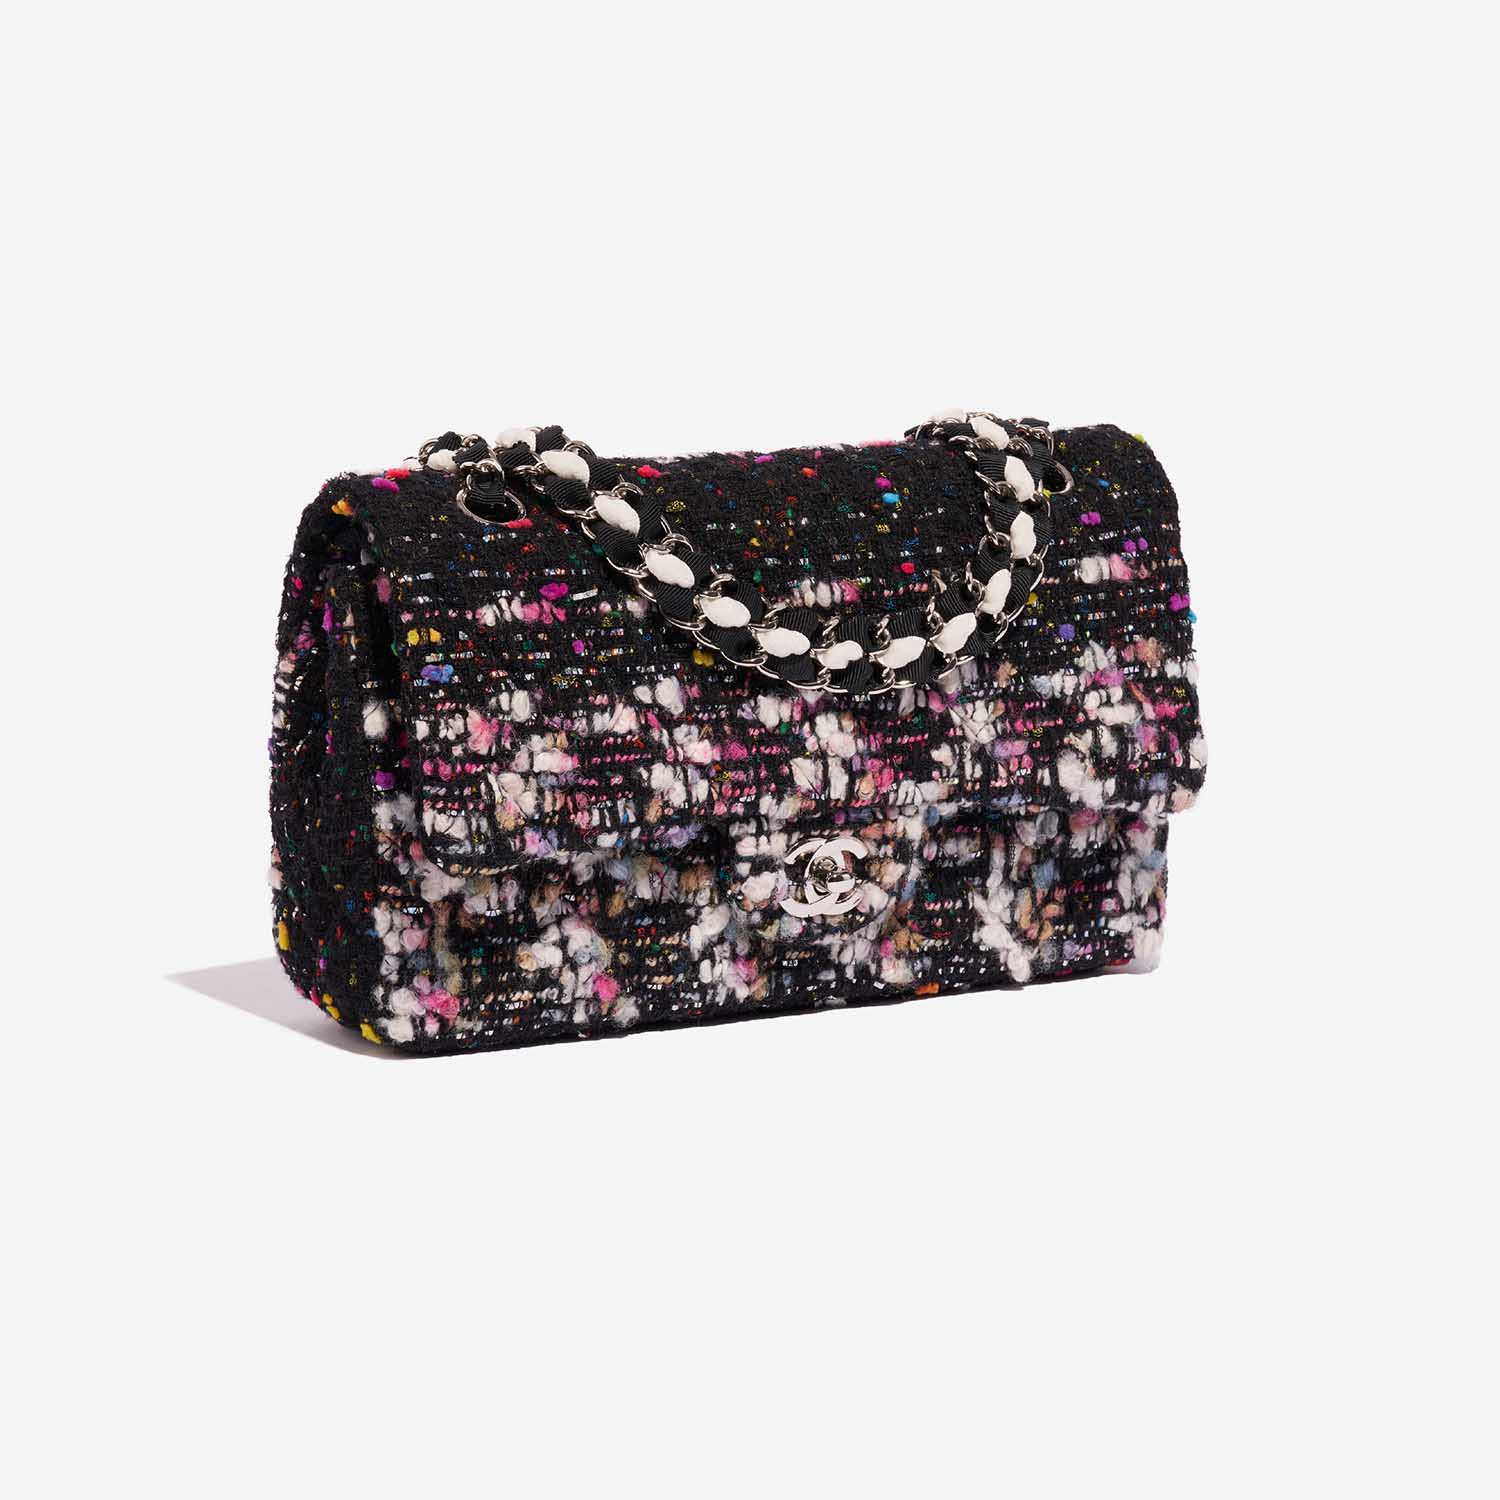 Pre-owned Chanel bag Timeless Medium Tweed Black / Multicolour Black, Multicolour Side Front | Sell your designer bag on Saclab.com